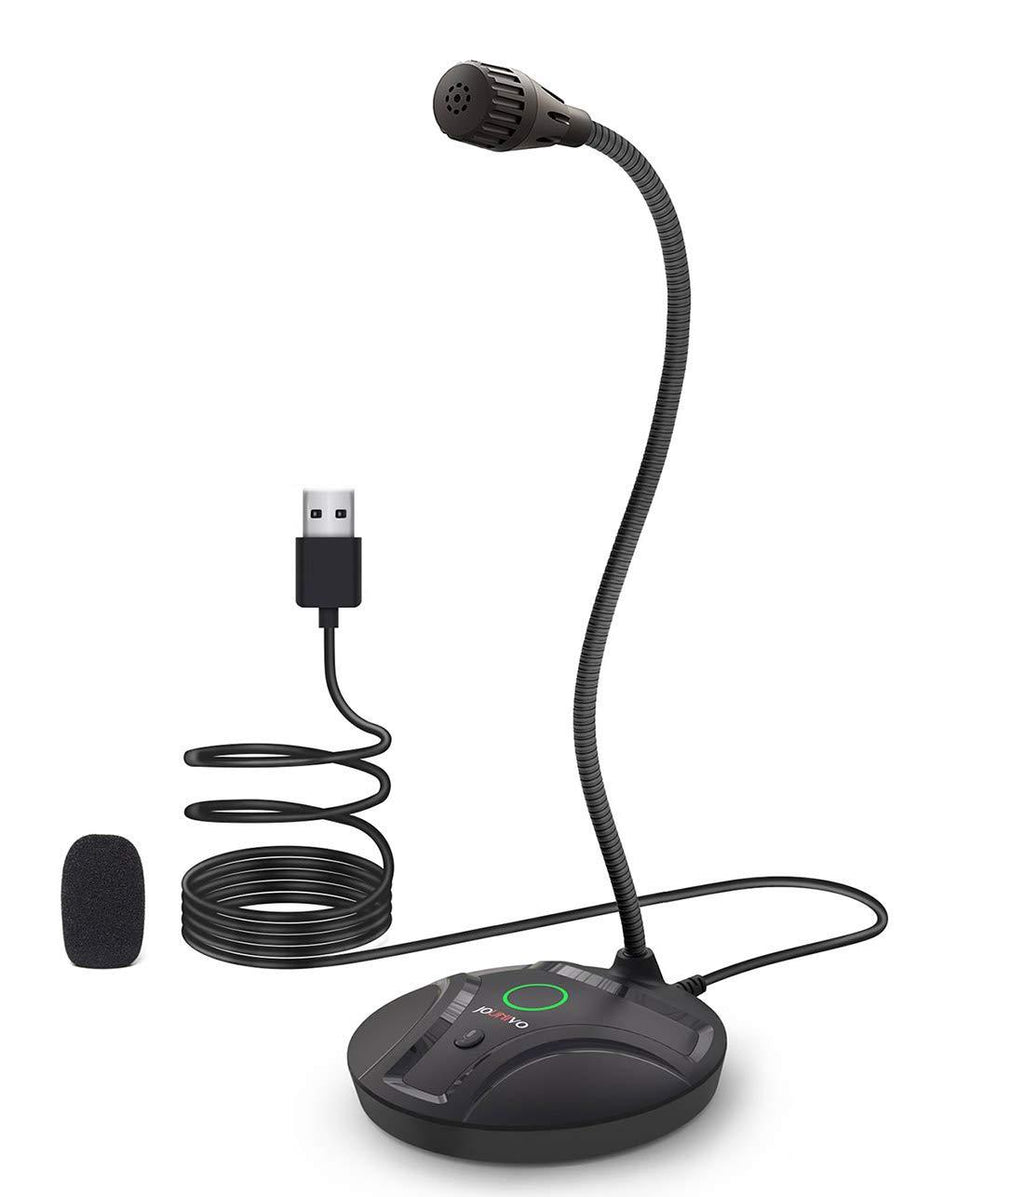 [AUSTRALIA] - Microphone for Computer, Gaming Mic JV605 with Mute Button Compatible with Desktop PC Laptop Mac PS4, Play & Plug USB Cardioid Gooseneck Mic Recording for Skype Streaming YouTube Game Podcast Cmix-605 